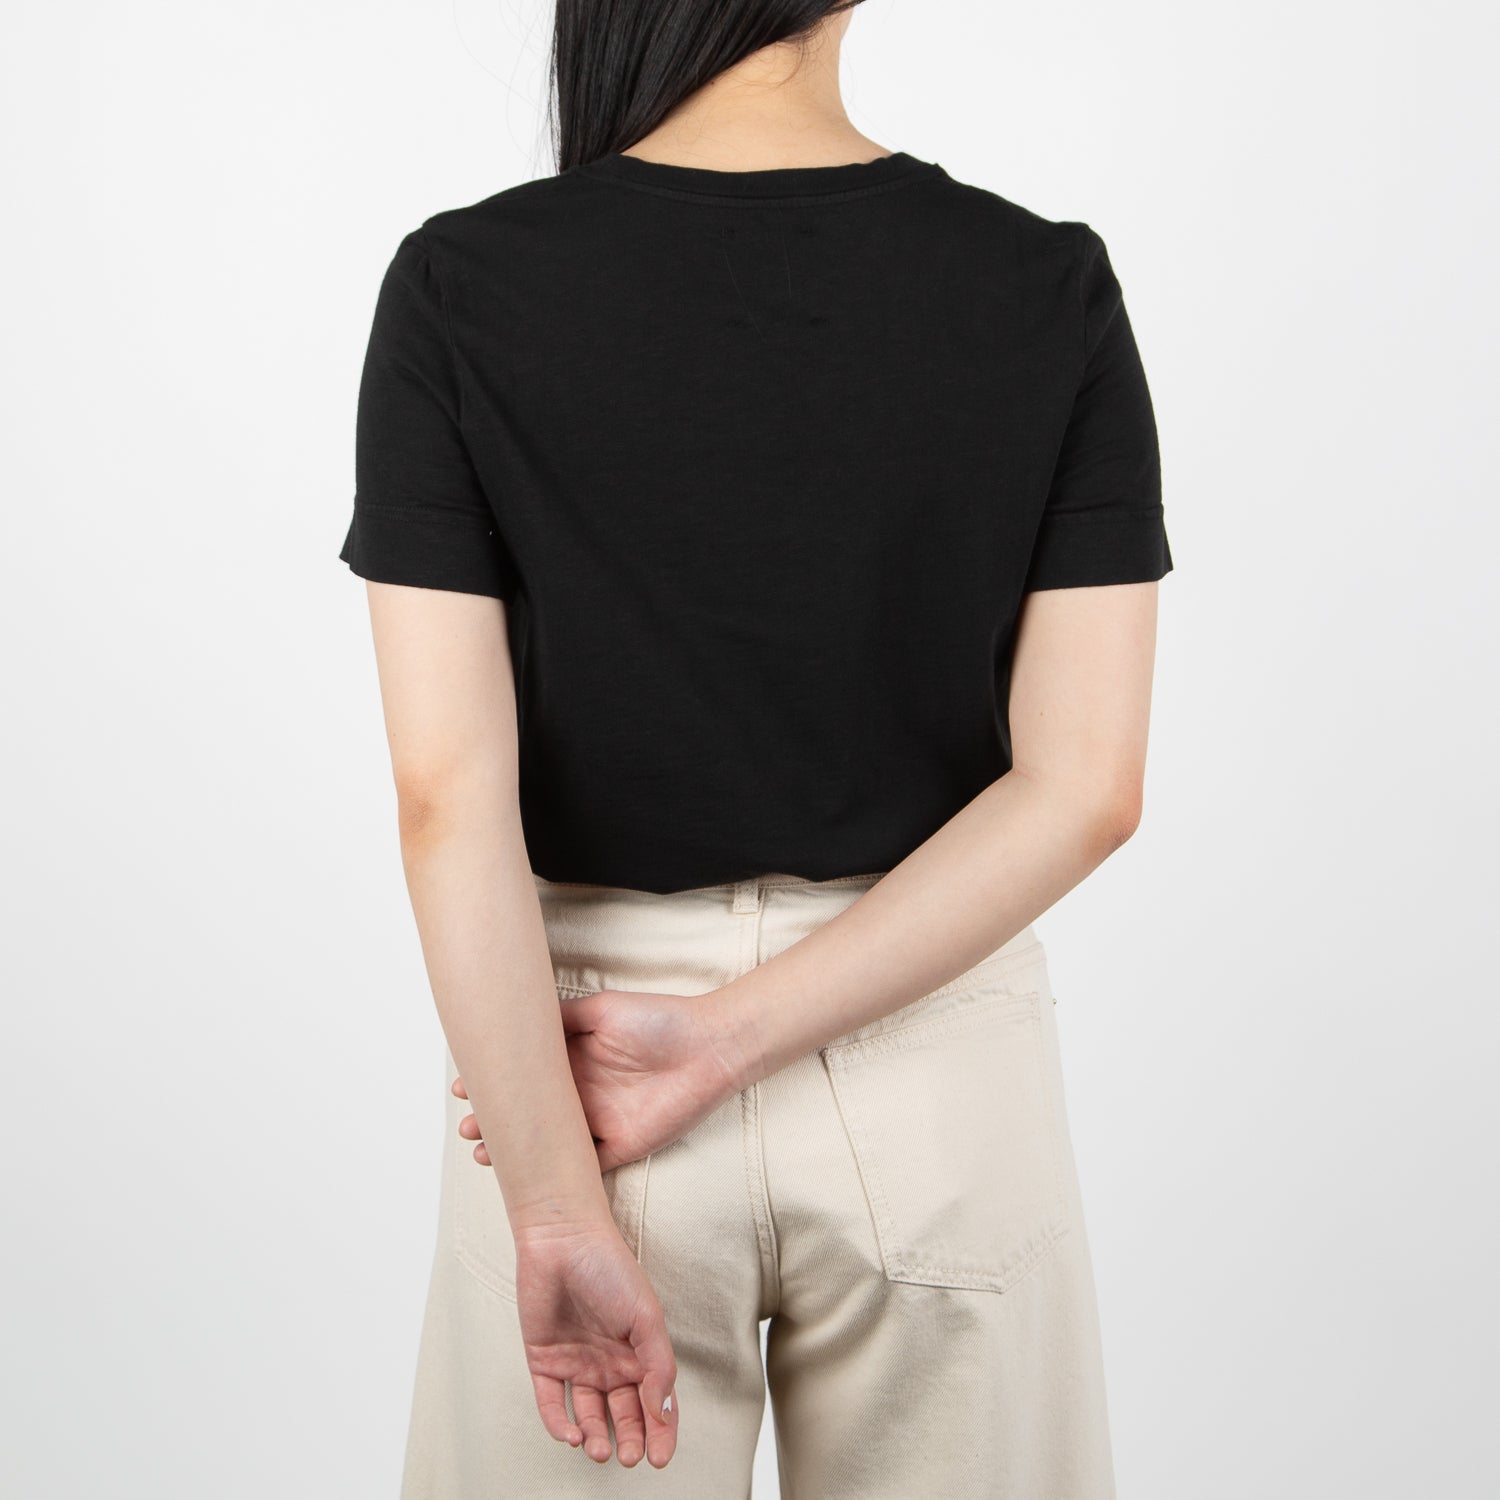 black woven cotton shirt with phrase by Secret Location